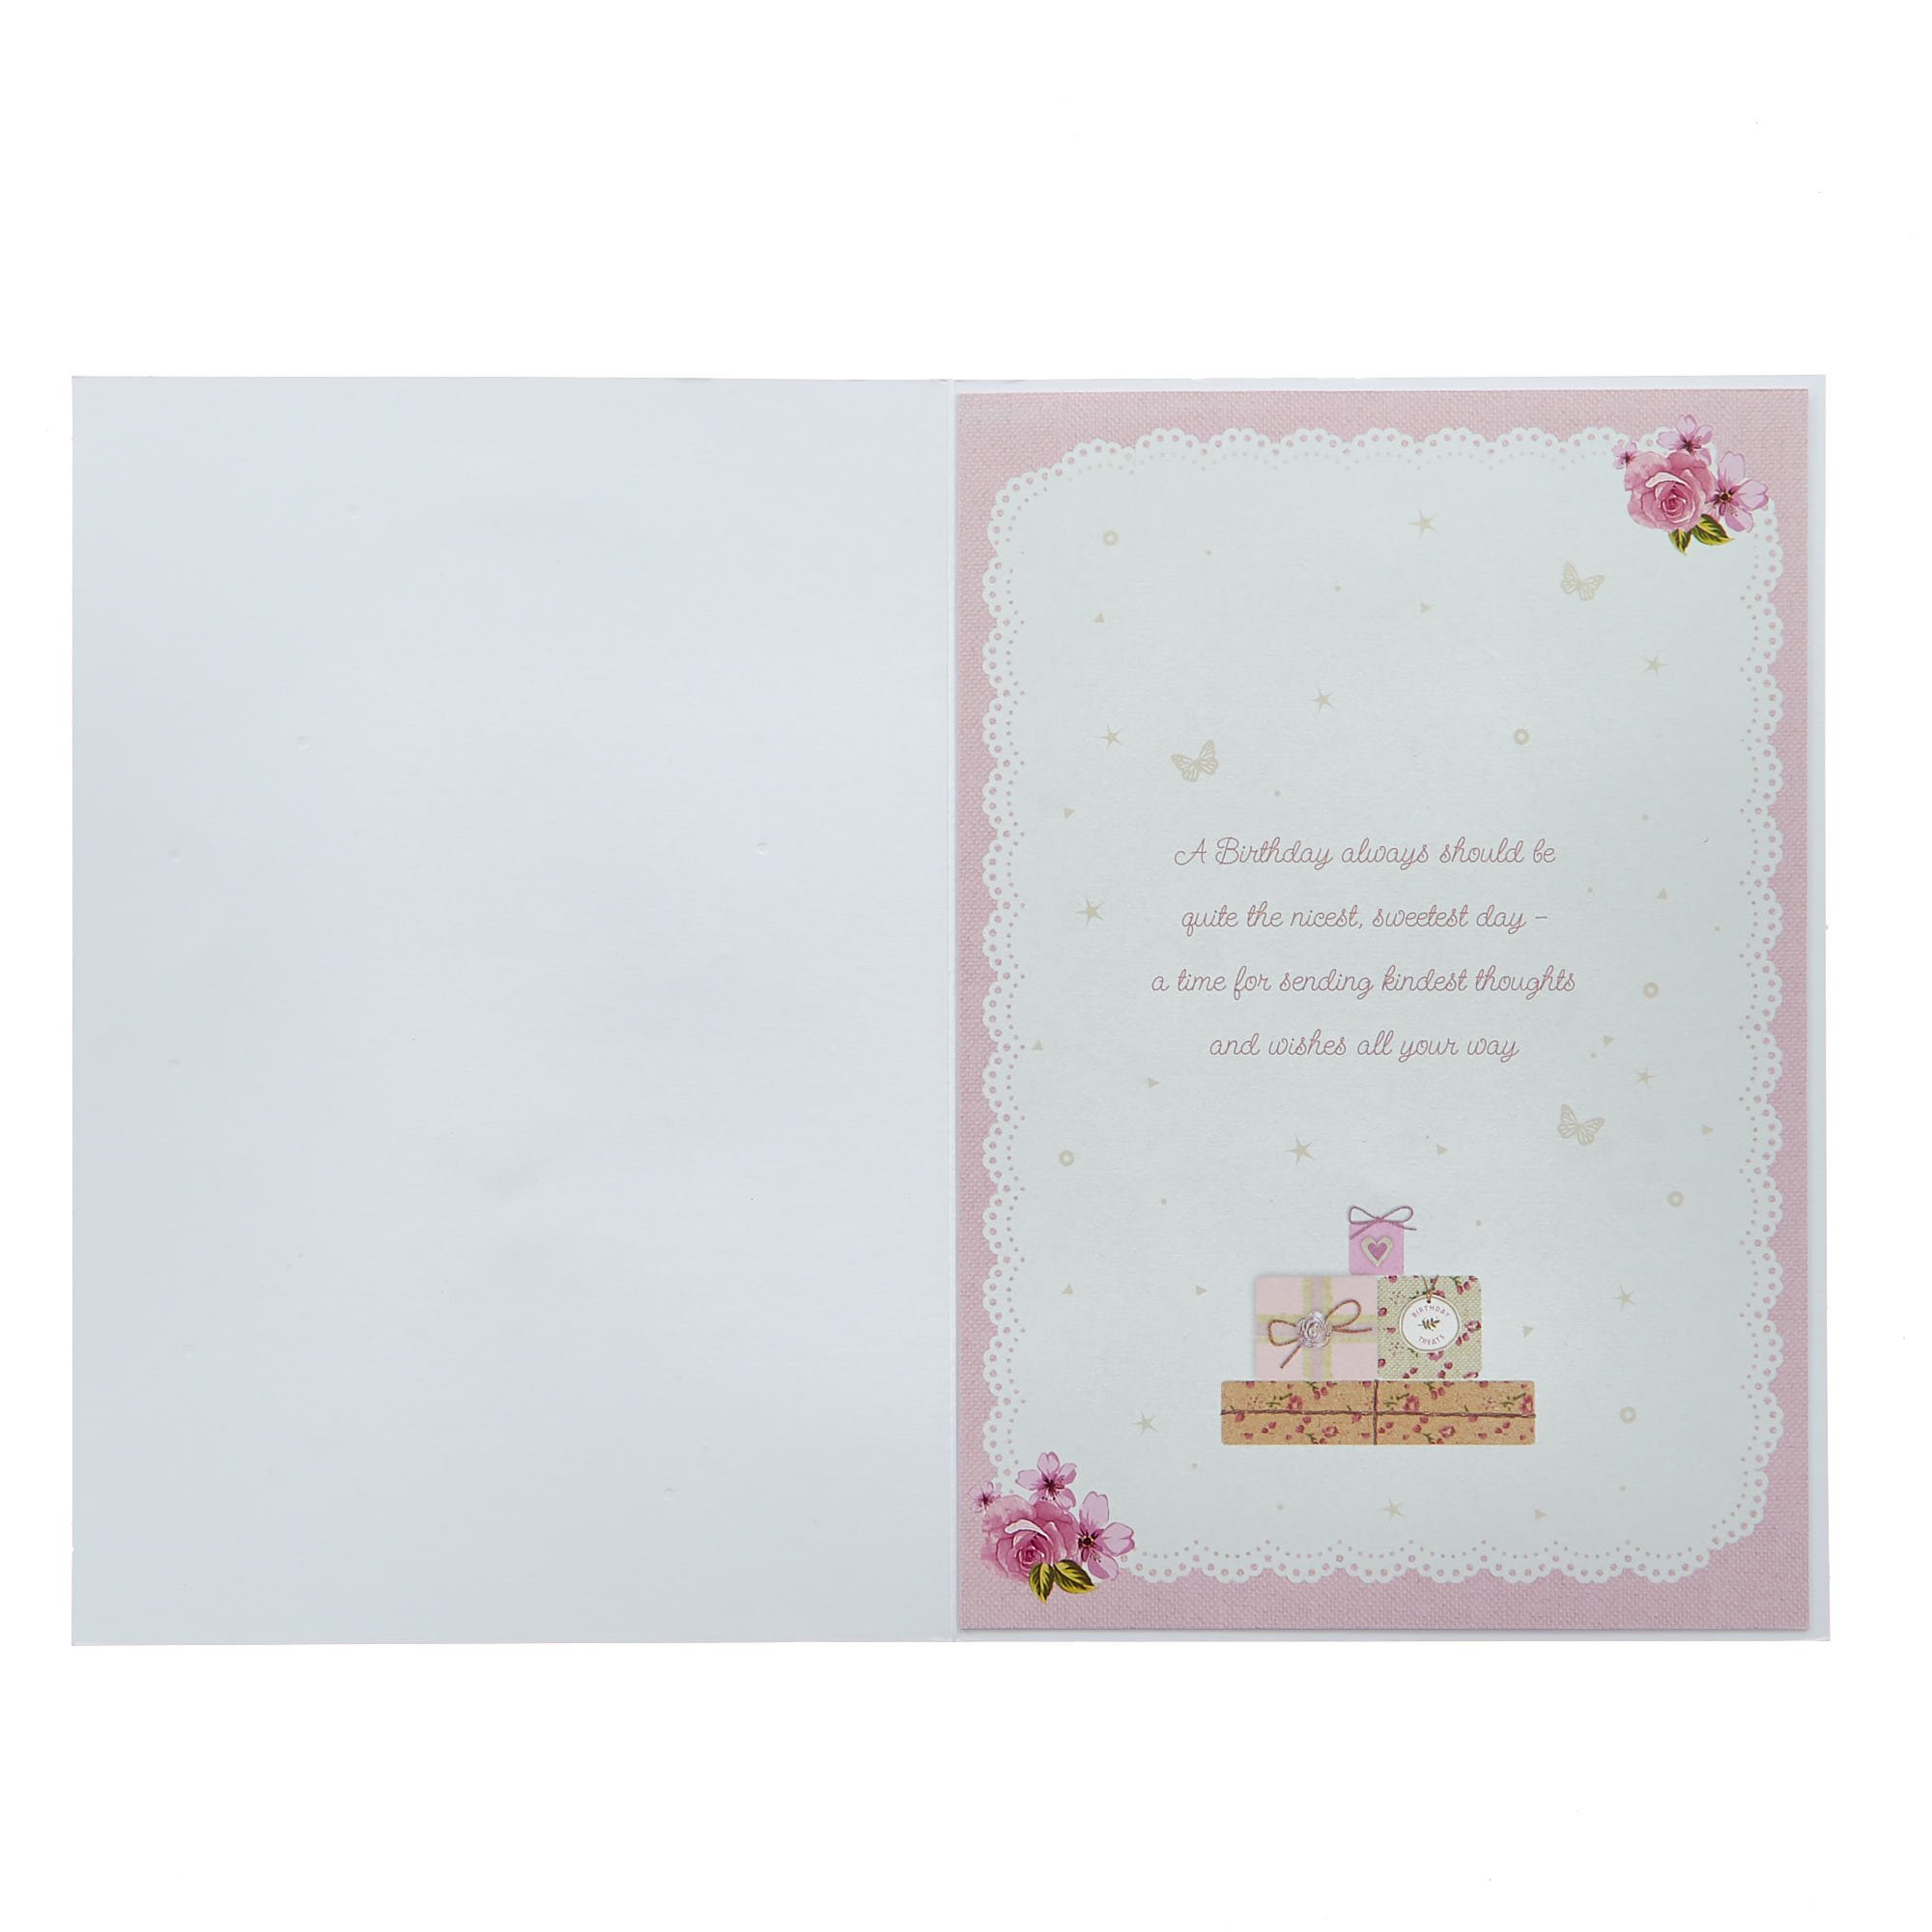 Birthday Card - A Lovely Wish Just For You